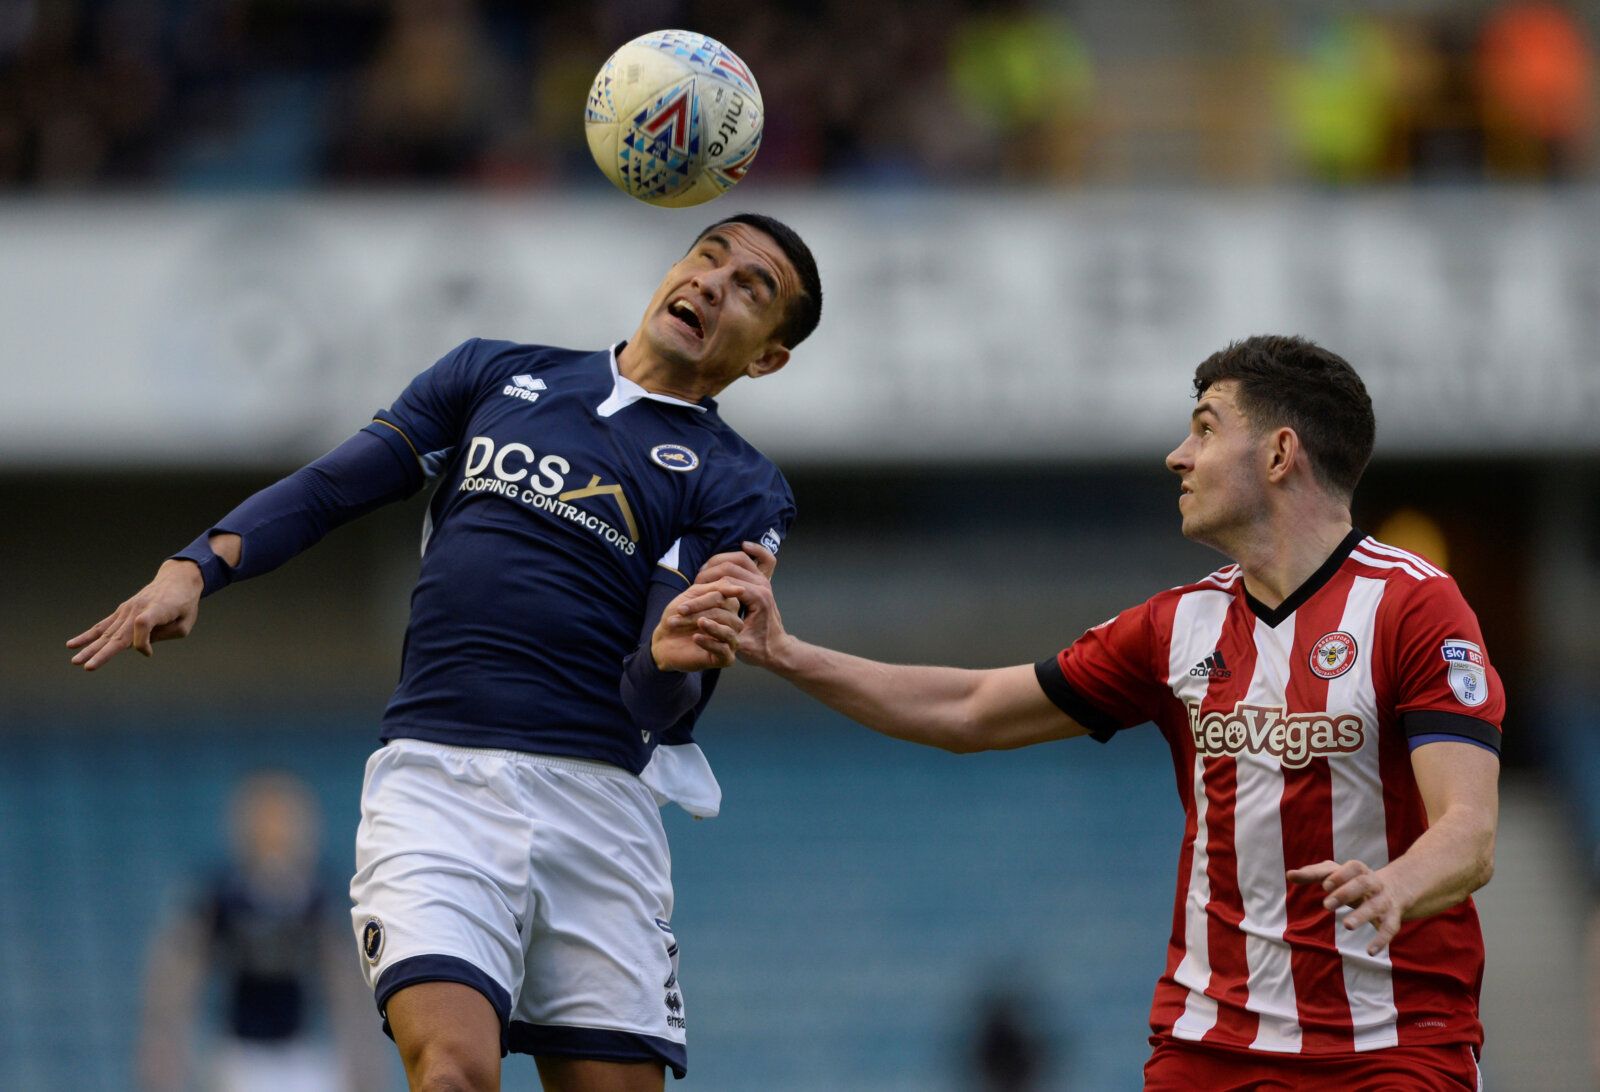 Soccer Football - Championship - Millwall vs Brentford - The Den, London, Britain - March 10, 2018  Millwall's Tim Cahill in action with Brentford's John Egan  Action Images/Adam Holt  EDITORIAL USE ONLY. No use with unauthorized audio, video, data, fixture lists, club/league logos or 